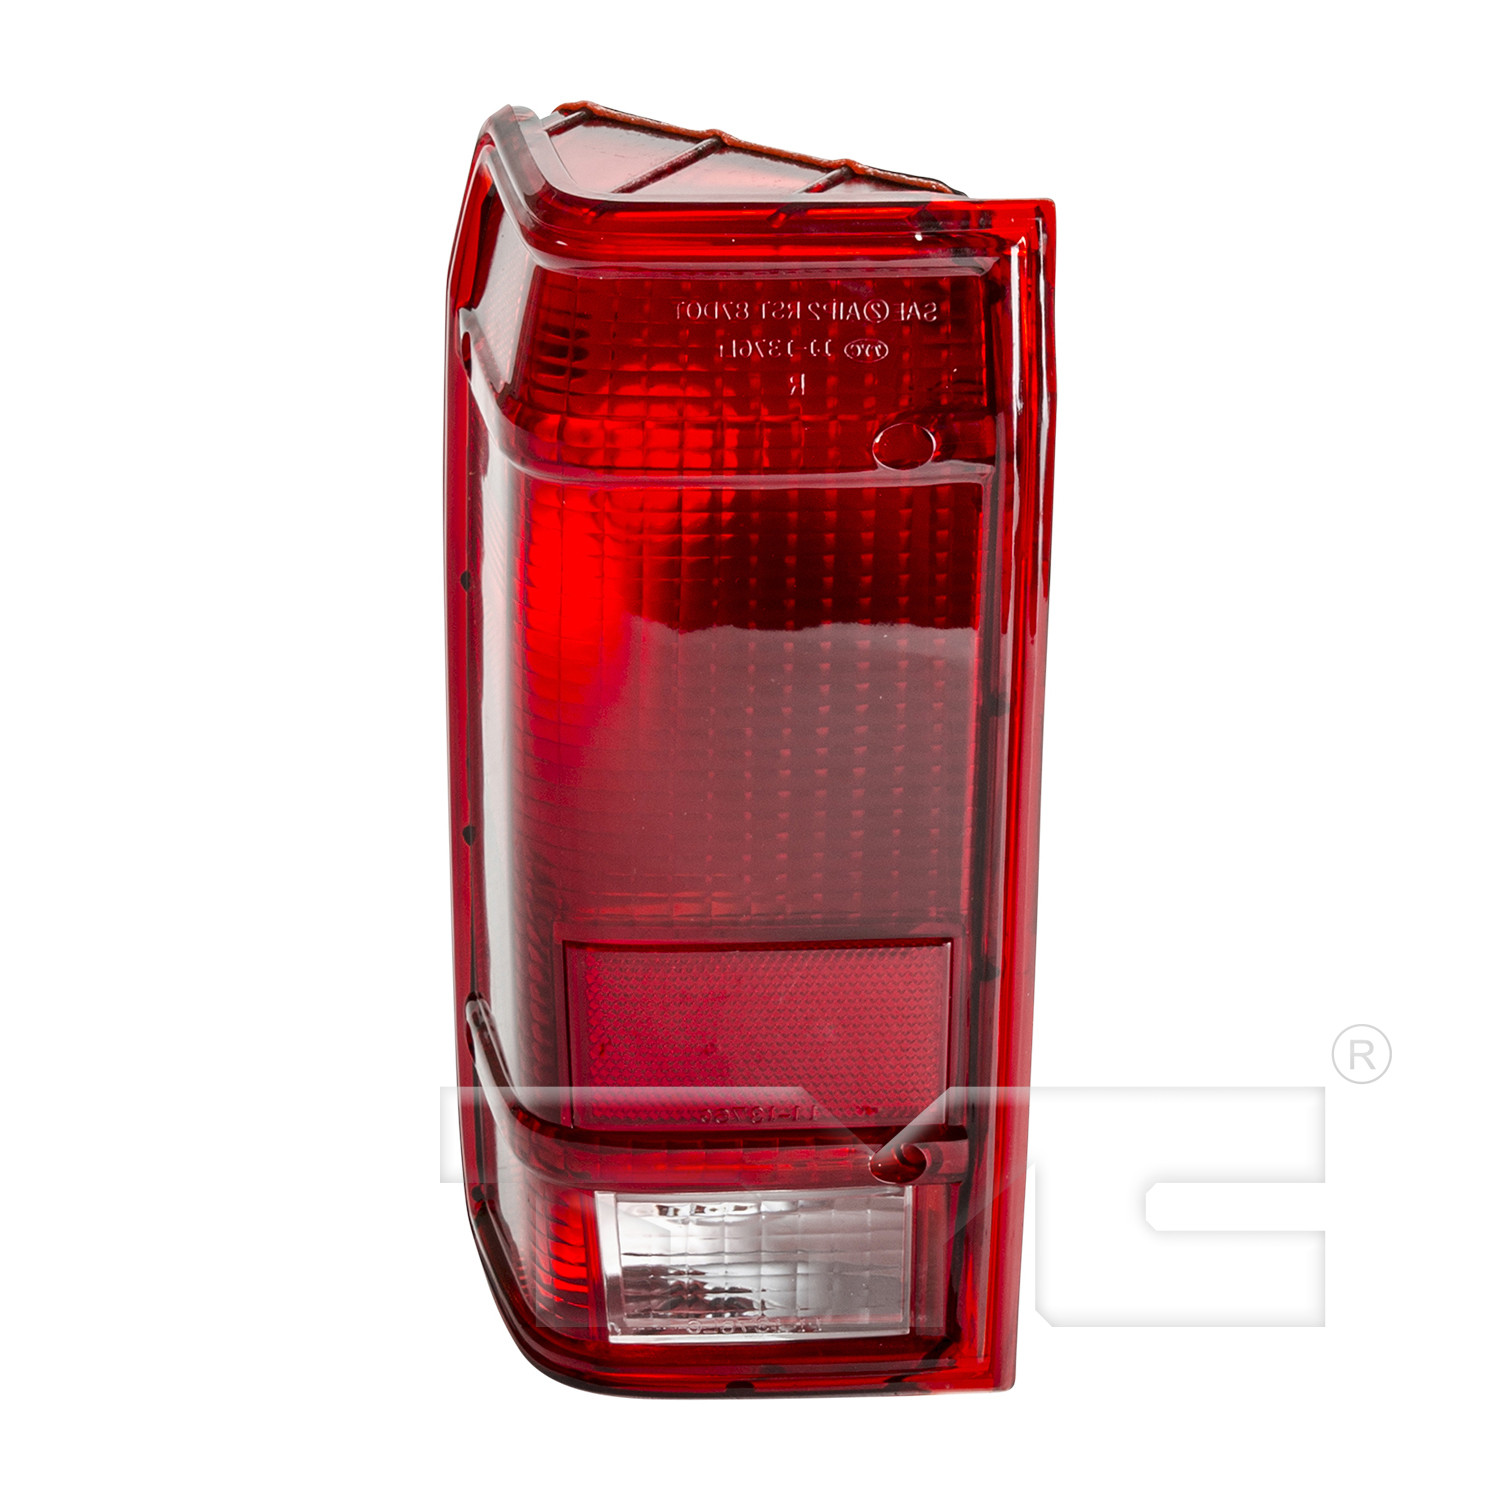 Aftermarket TAILLIGHTS for FORD - RANGER, RANGER,91-92,LT Taillamp assy